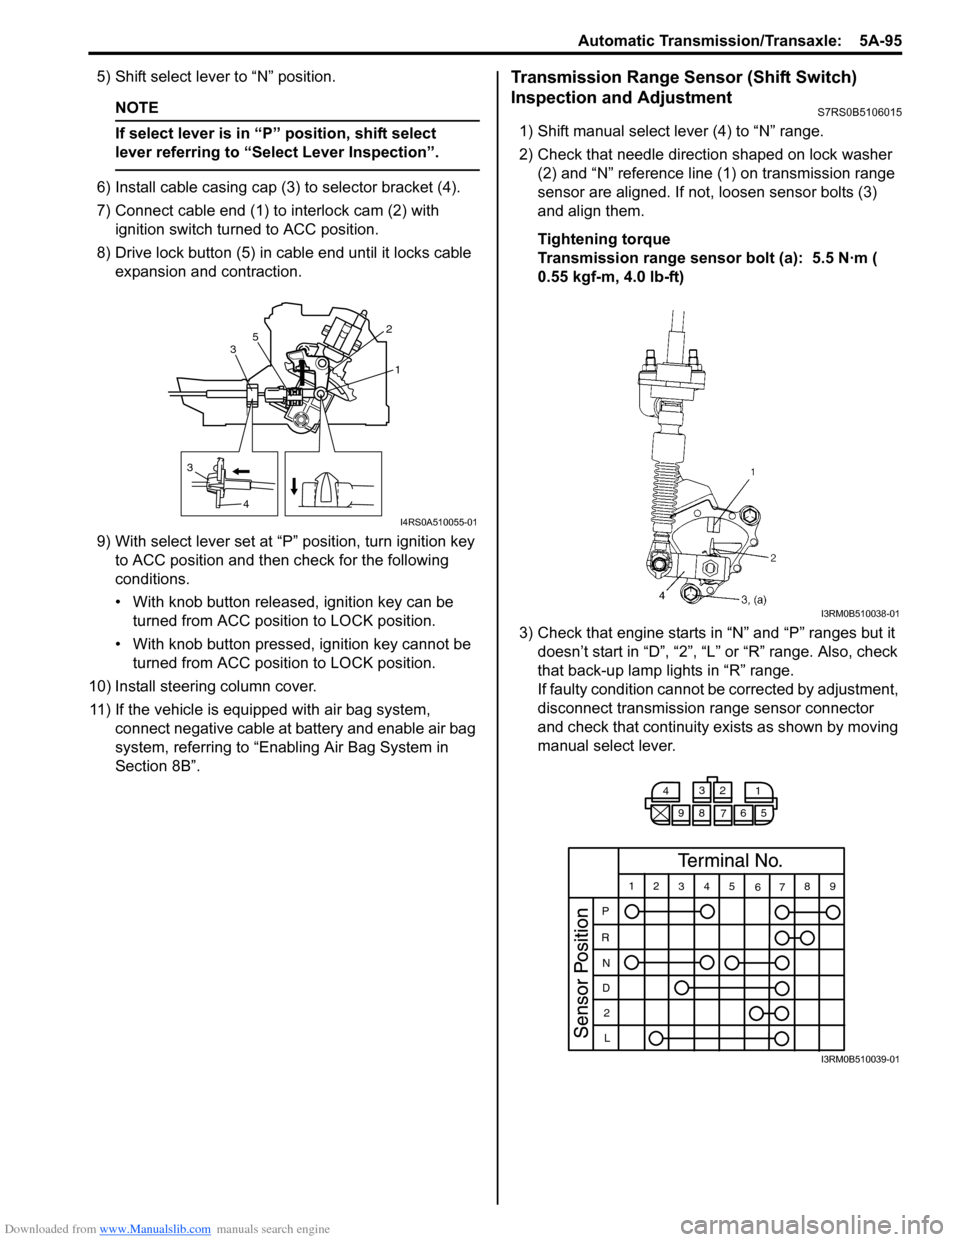 SUZUKI SWIFT 2007 2.G Service Owners Guide Downloaded from www.Manualslib.com manuals search engine Automatic Transmission/Transaxle:  5A-95
5) Shift select lever to “N” position.
NOTE
If select lever is in “P” position, shift select 
